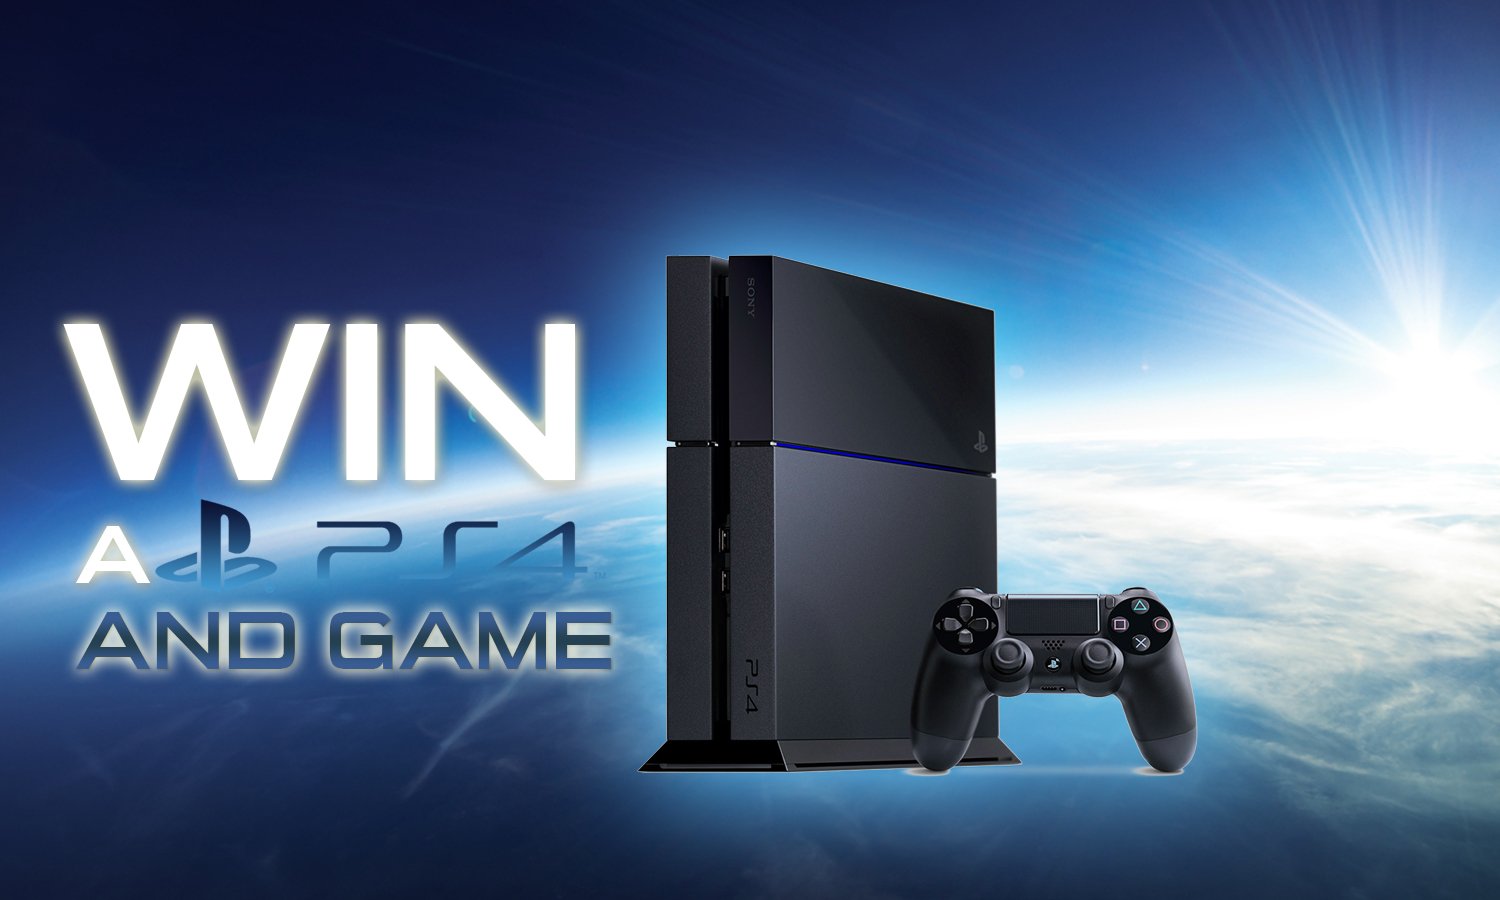 Win a Playstation 4 and Game